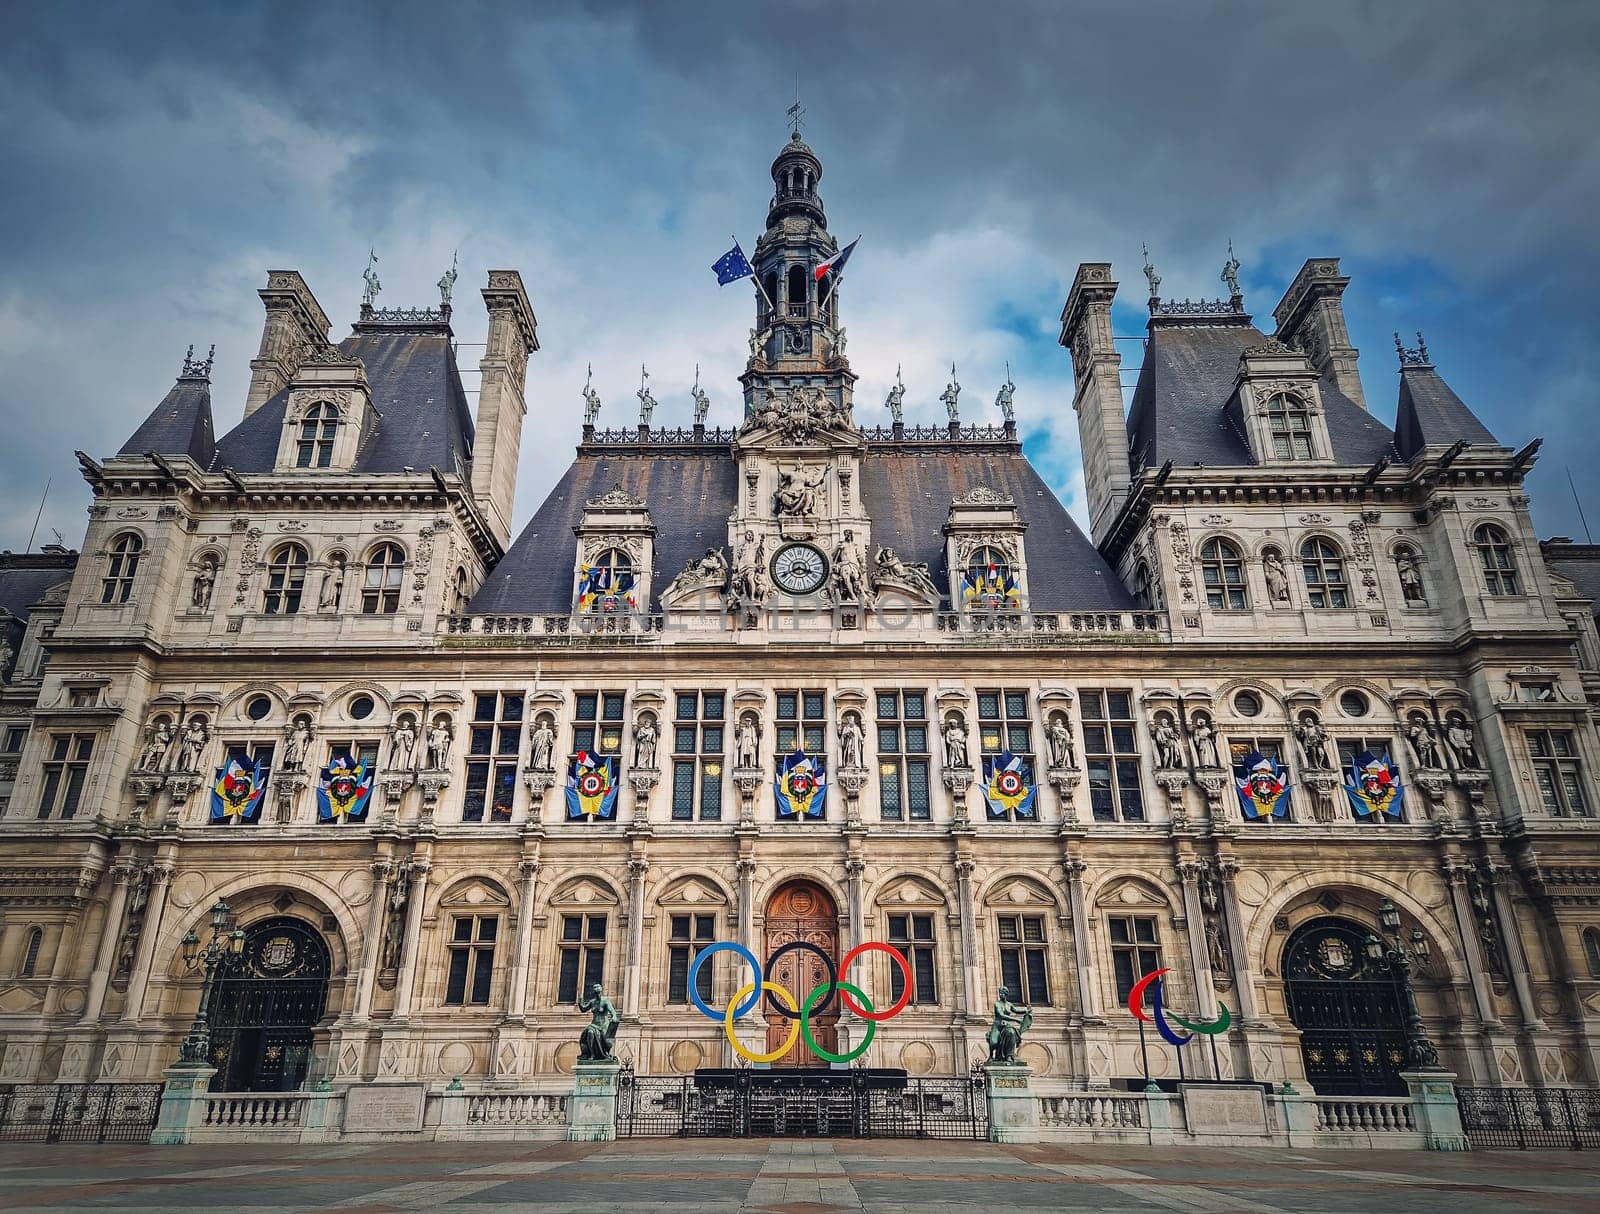 Paris City Hall, France. Outdoors view to the beautiful ornate facade of the historical building and the olympic games rings symbol in front of the central doors